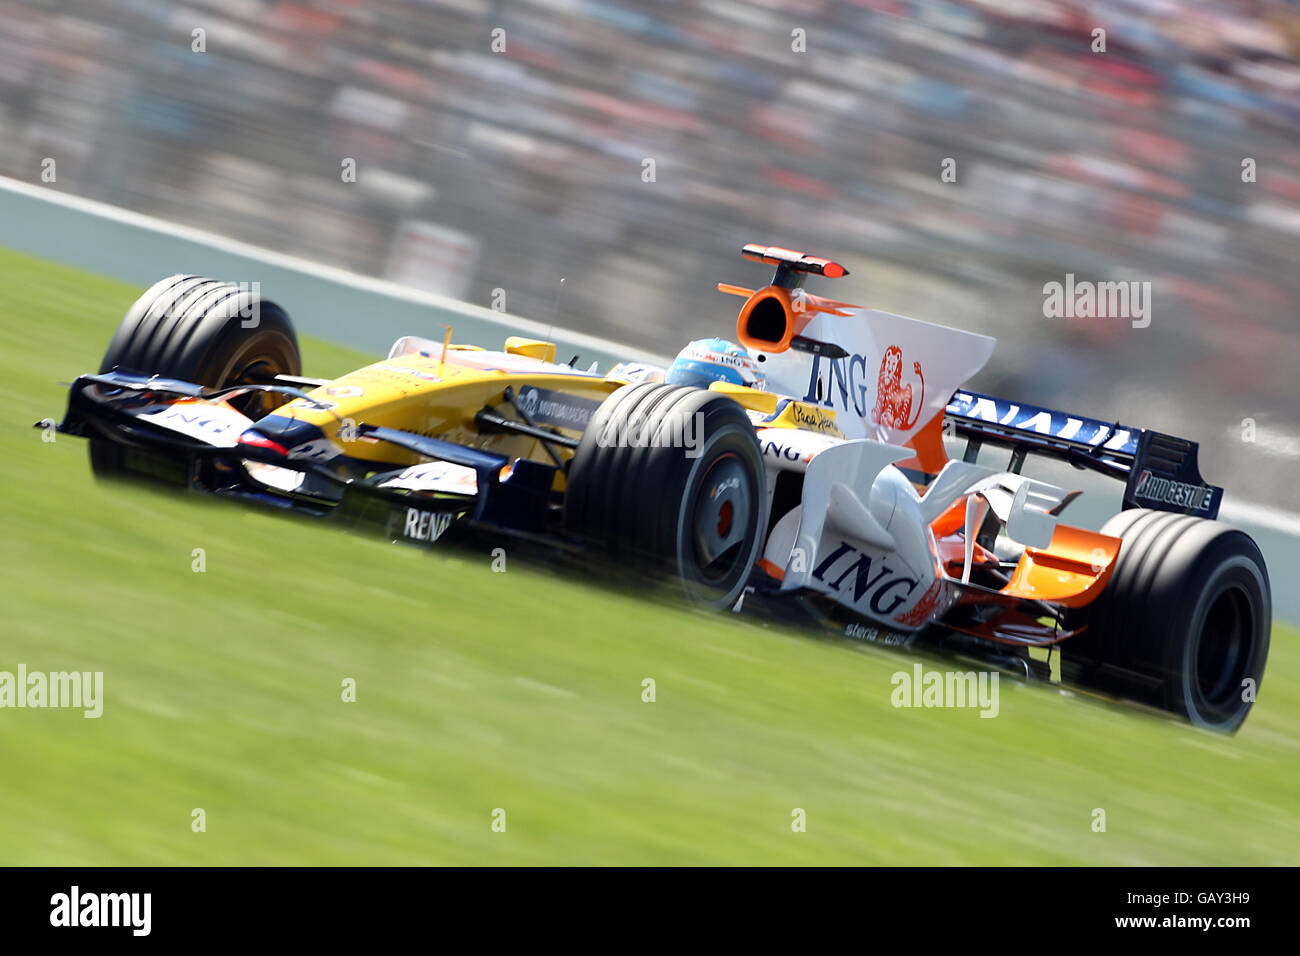 Renault's Fernando Alonso during qualifying for the Grand Prix at Magny-Cours, Nevers, France. Stock Photo